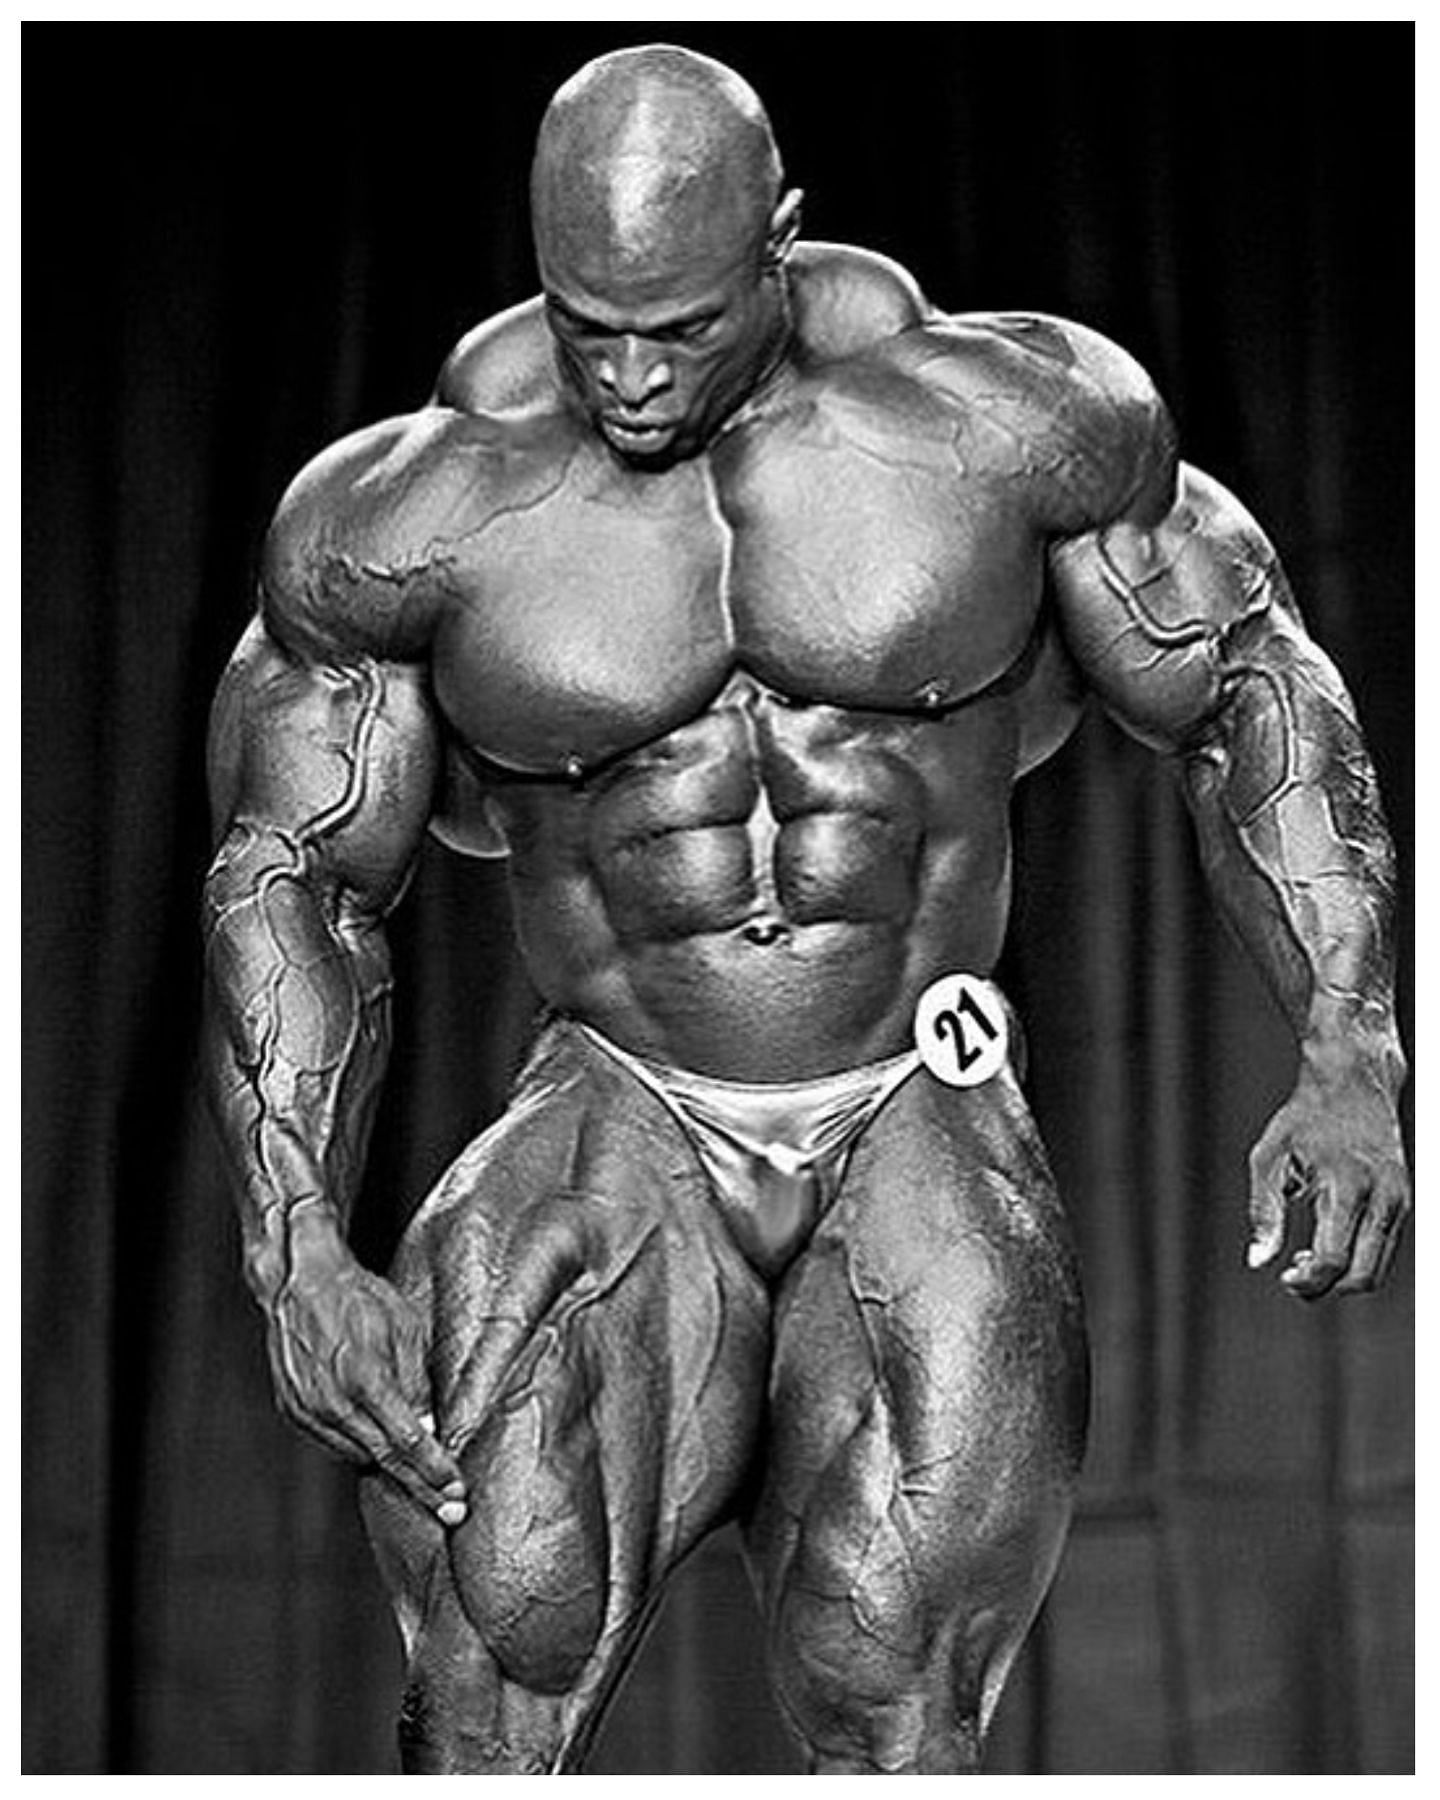 Ronnie Coleman Signed 8x10 Photo Inscribed 